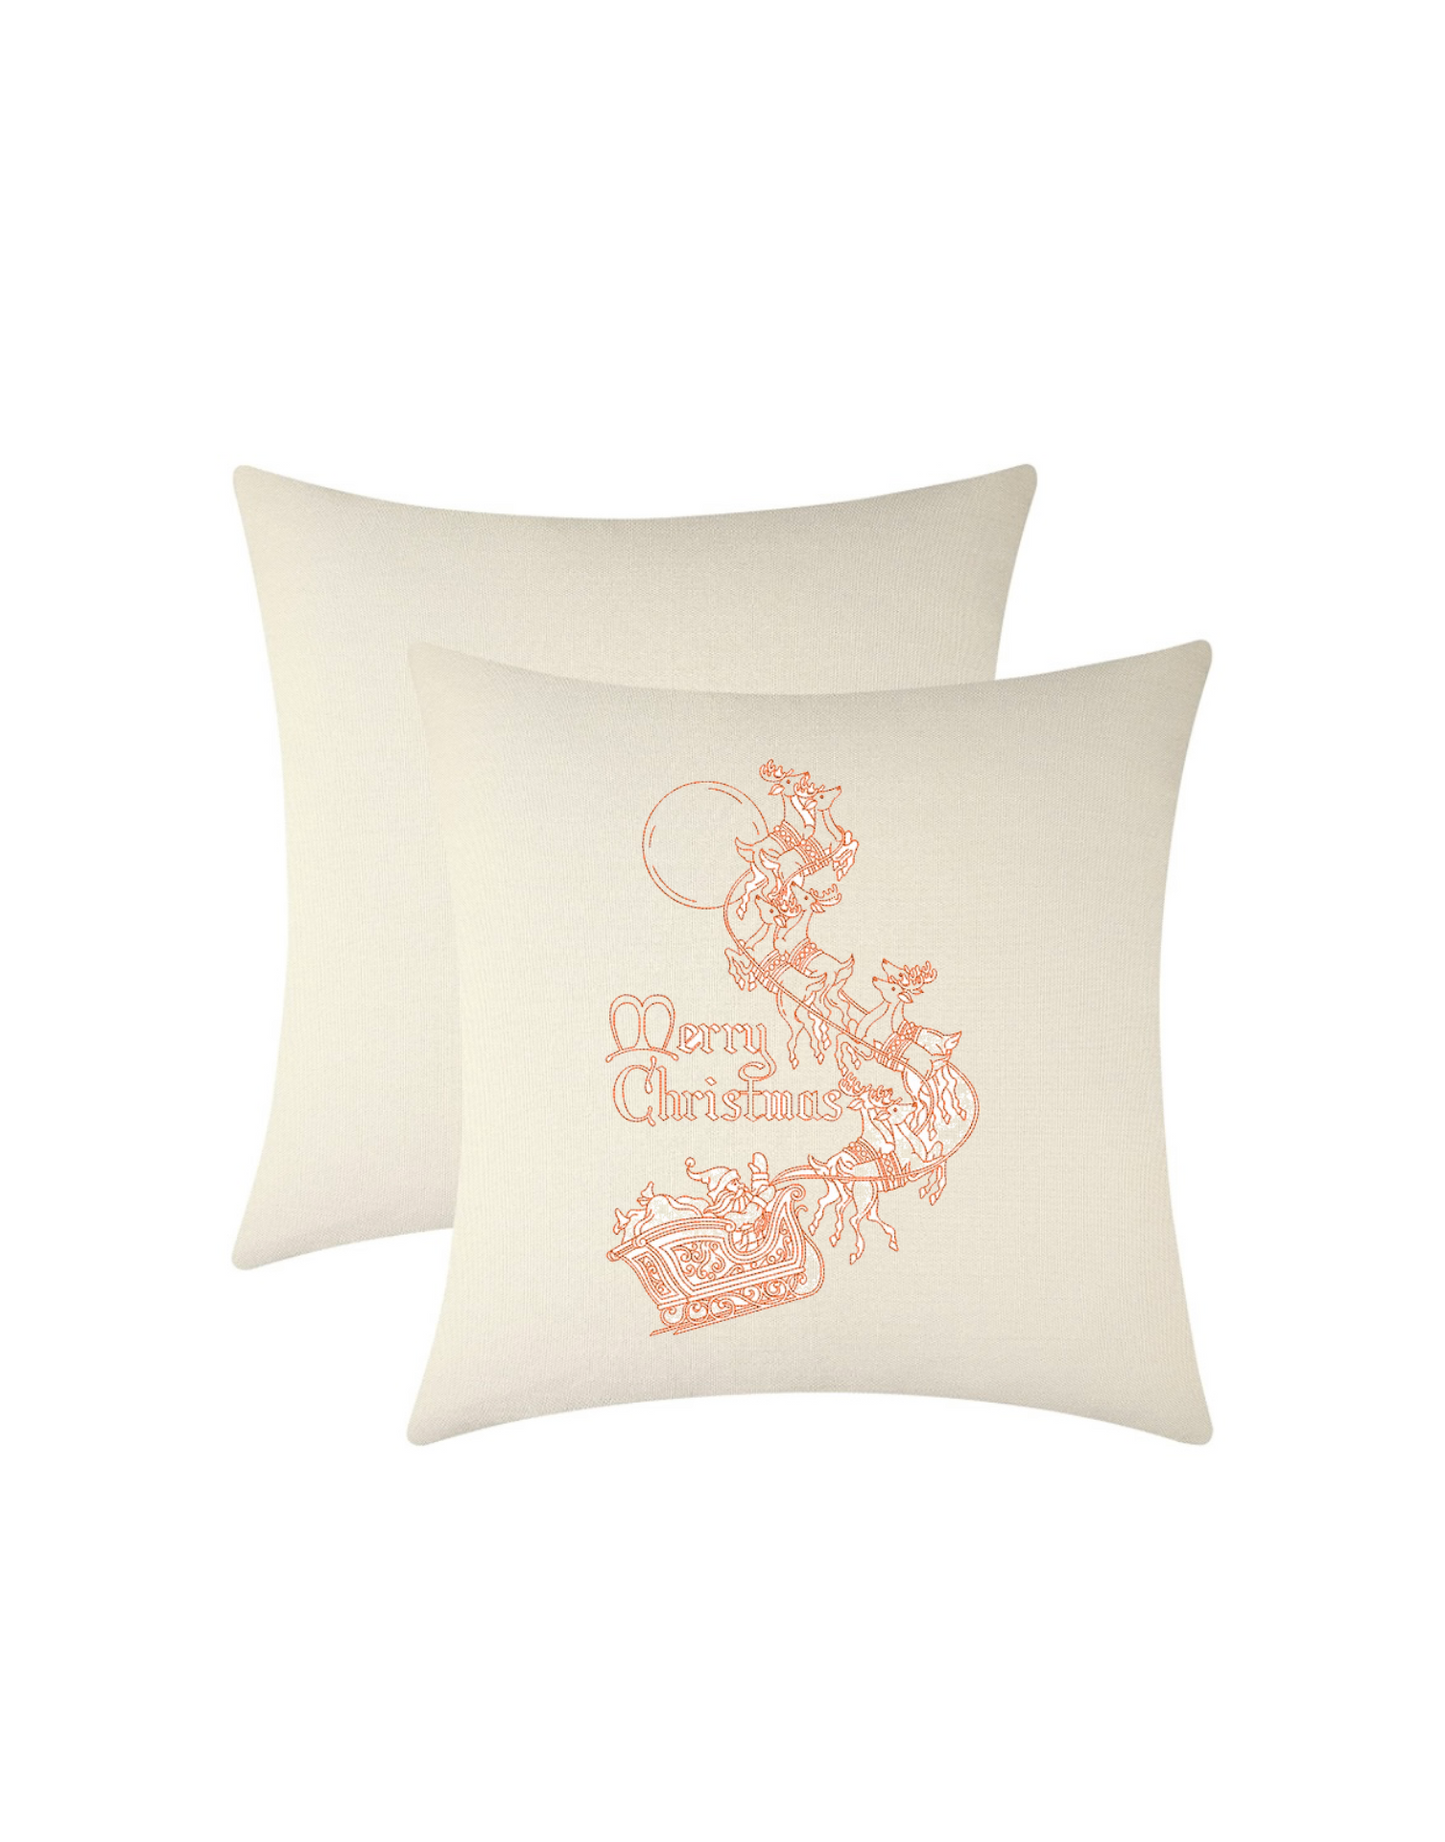 Santa’s Sleigh Ride Embroidered Throw Pillow Cover 18" x 18” Cotton Accent Pillow Cover Zip Closure.